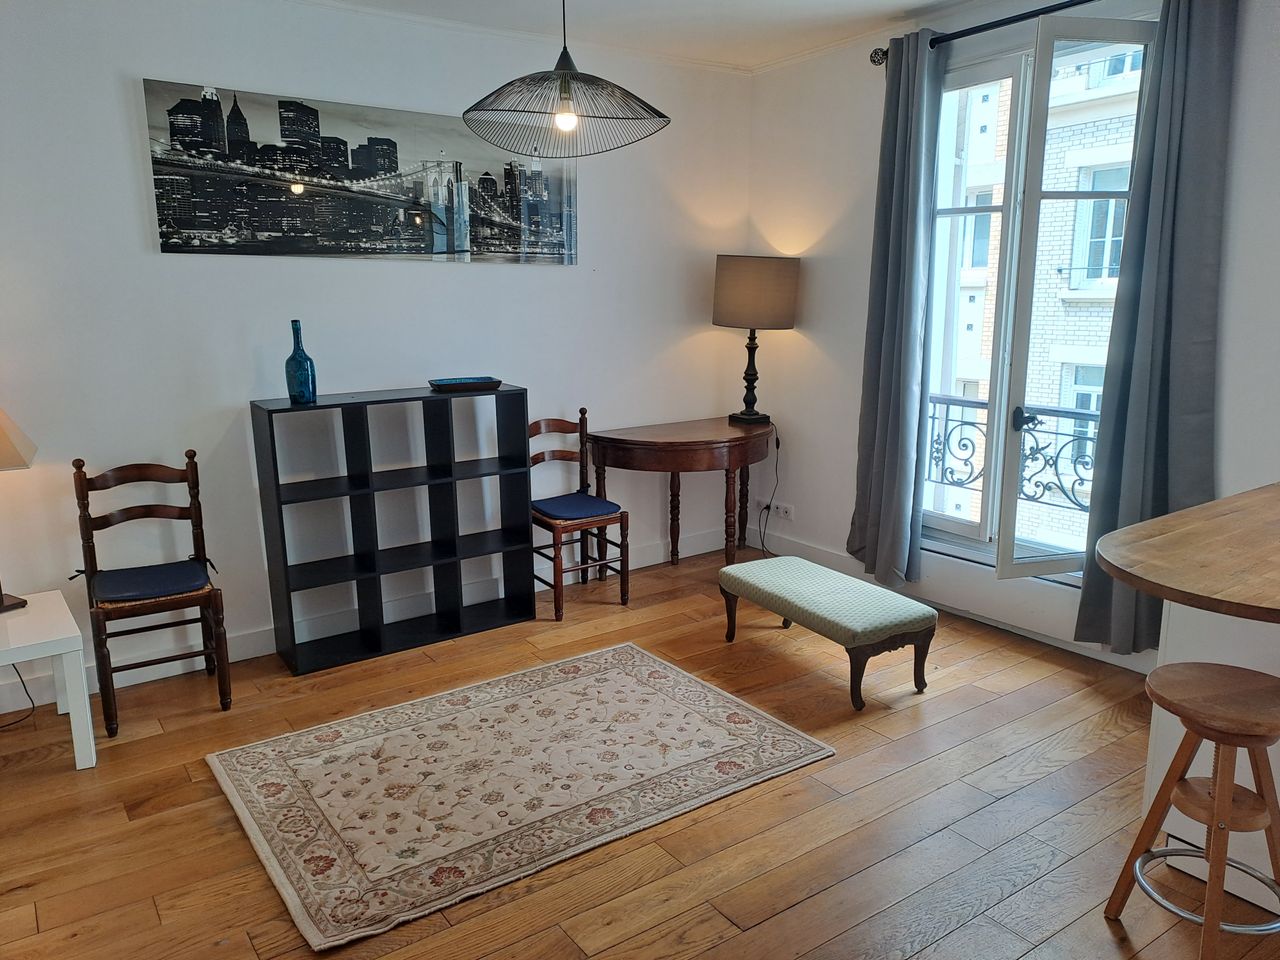 Bright and calm 2-bedroom apartment in a great neighbourhood